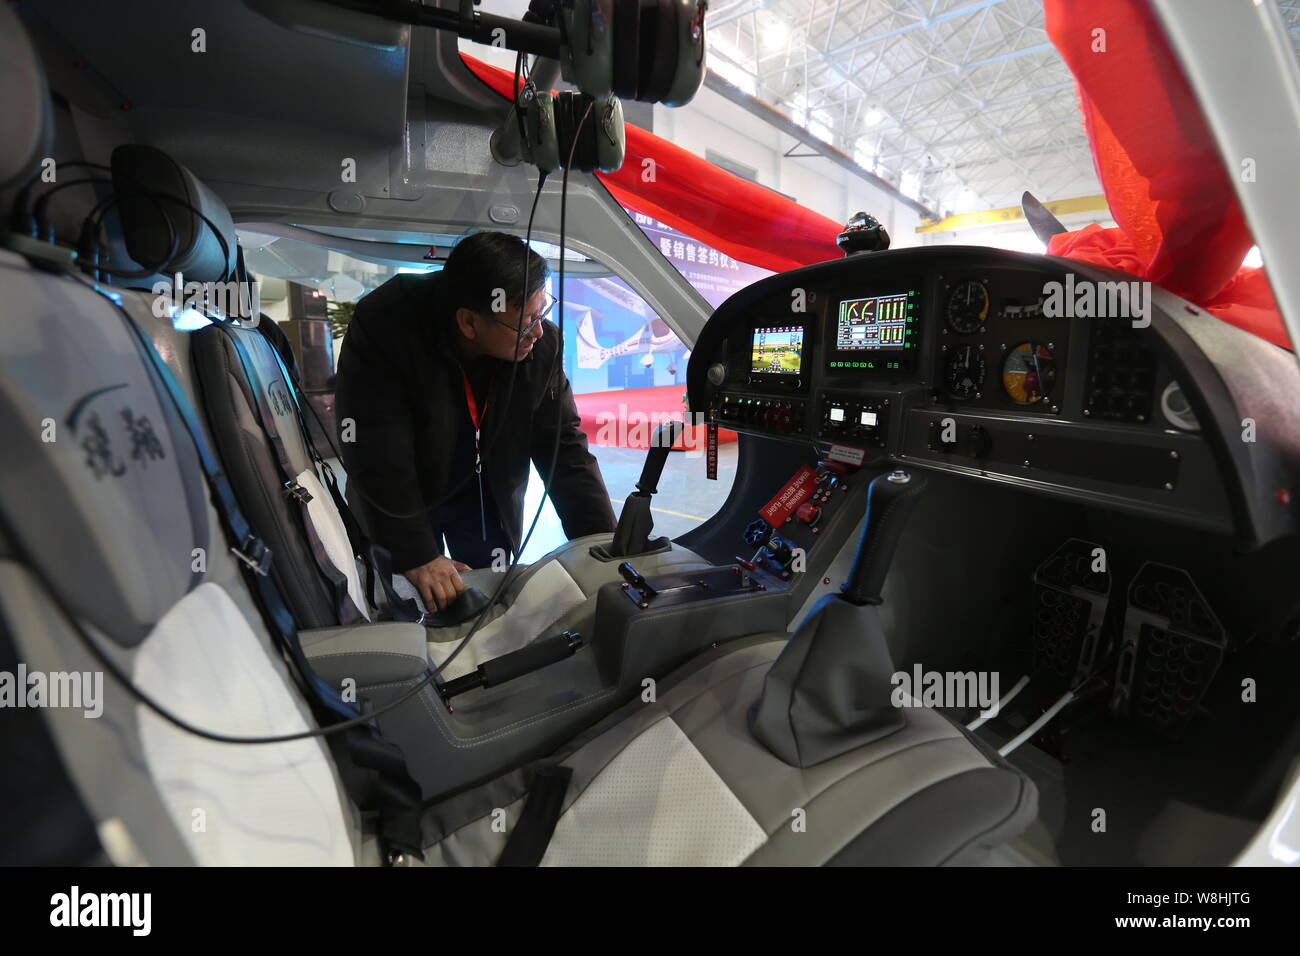 A visitor looks at the interior of China's first electric light sport aircraft RX1E Ruixiang on display during the sales contract signing ceremony at Stock Photo